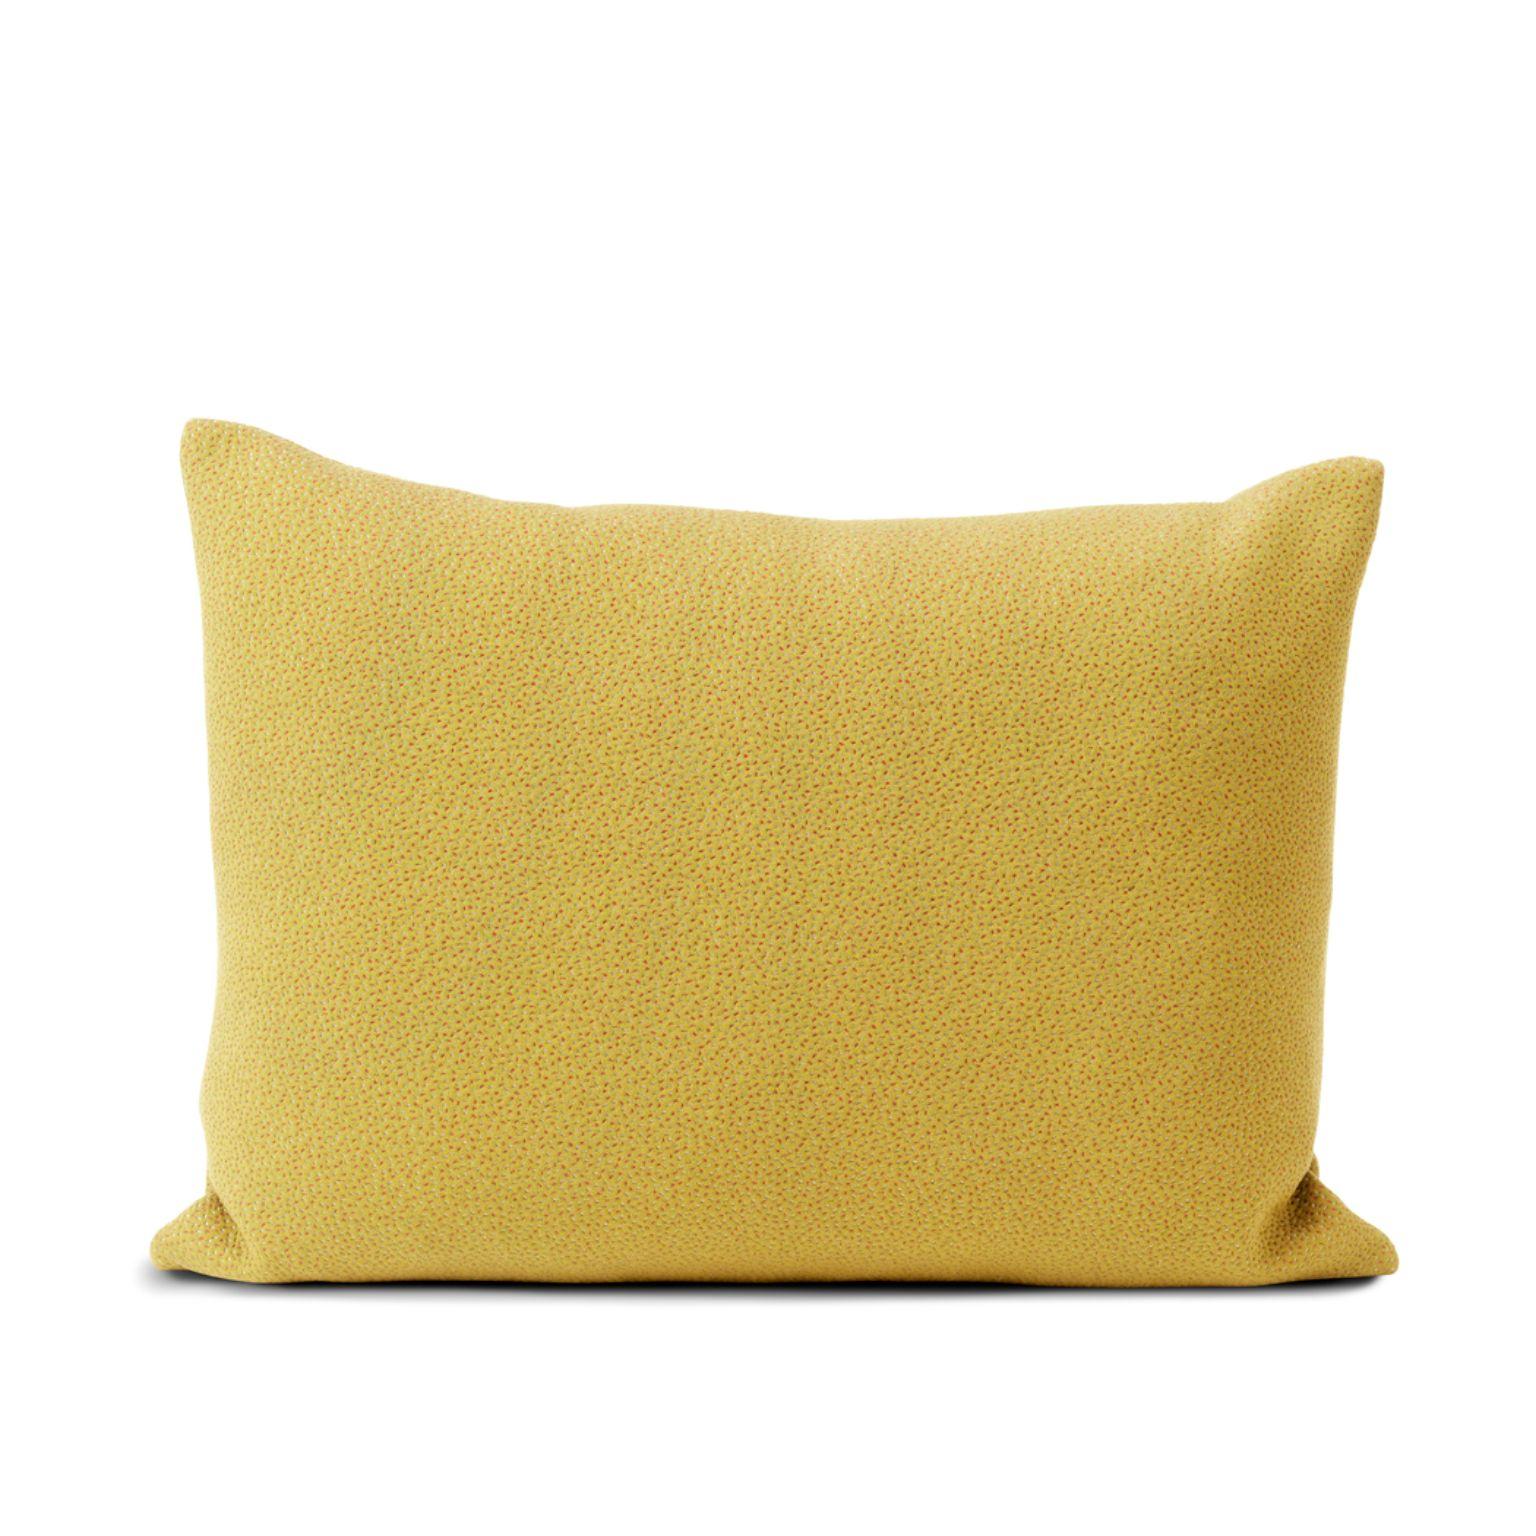 Galore cushion square sprinkles desert yellow by Warm Nordic
Dimensions: D70 x H 50 cm
Material: Textile upholstery, Granulate and feathers filling.
Weight: 1.4 kg
Also available in different colours and finishes. 

An elegant oversized sofa